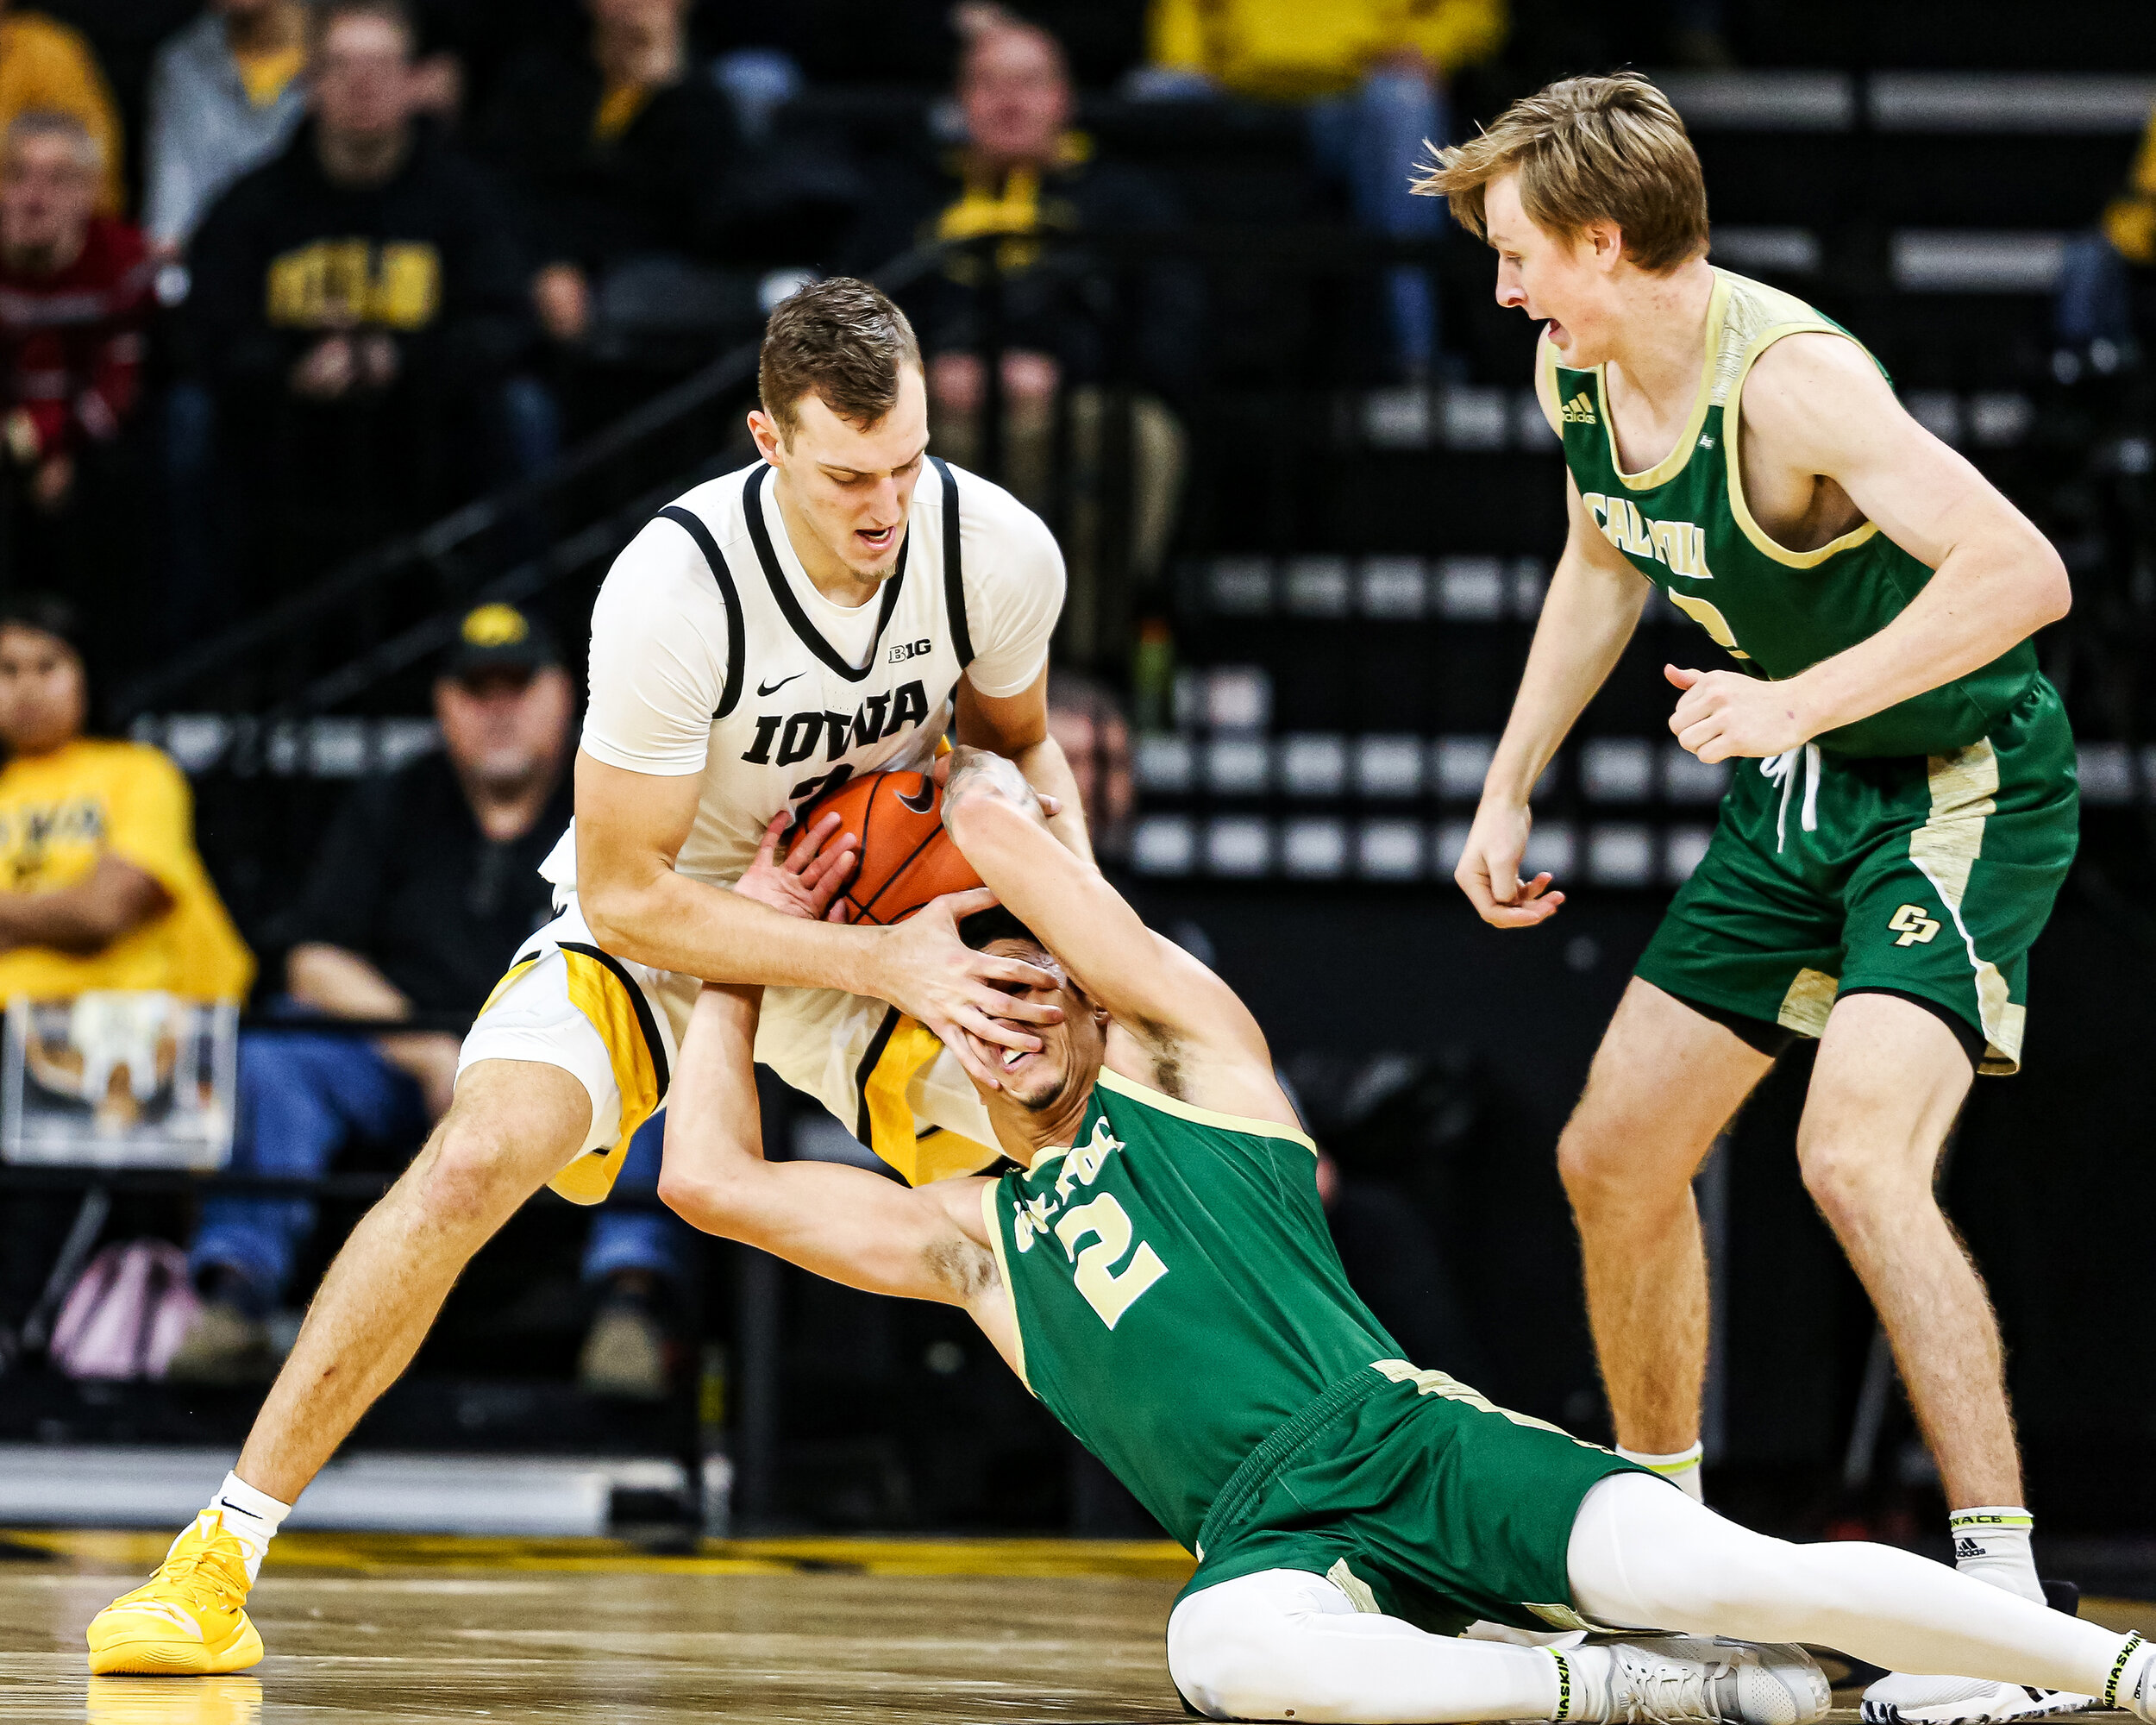  Iowa forward Jack Nunge (2) wrestles the ball away from Cal Poly forward Malek Harwell (2) during a basketball game against Cal Poly at Carver-Hawkeye Arena on Sunday, Nov. 24, 2019.  